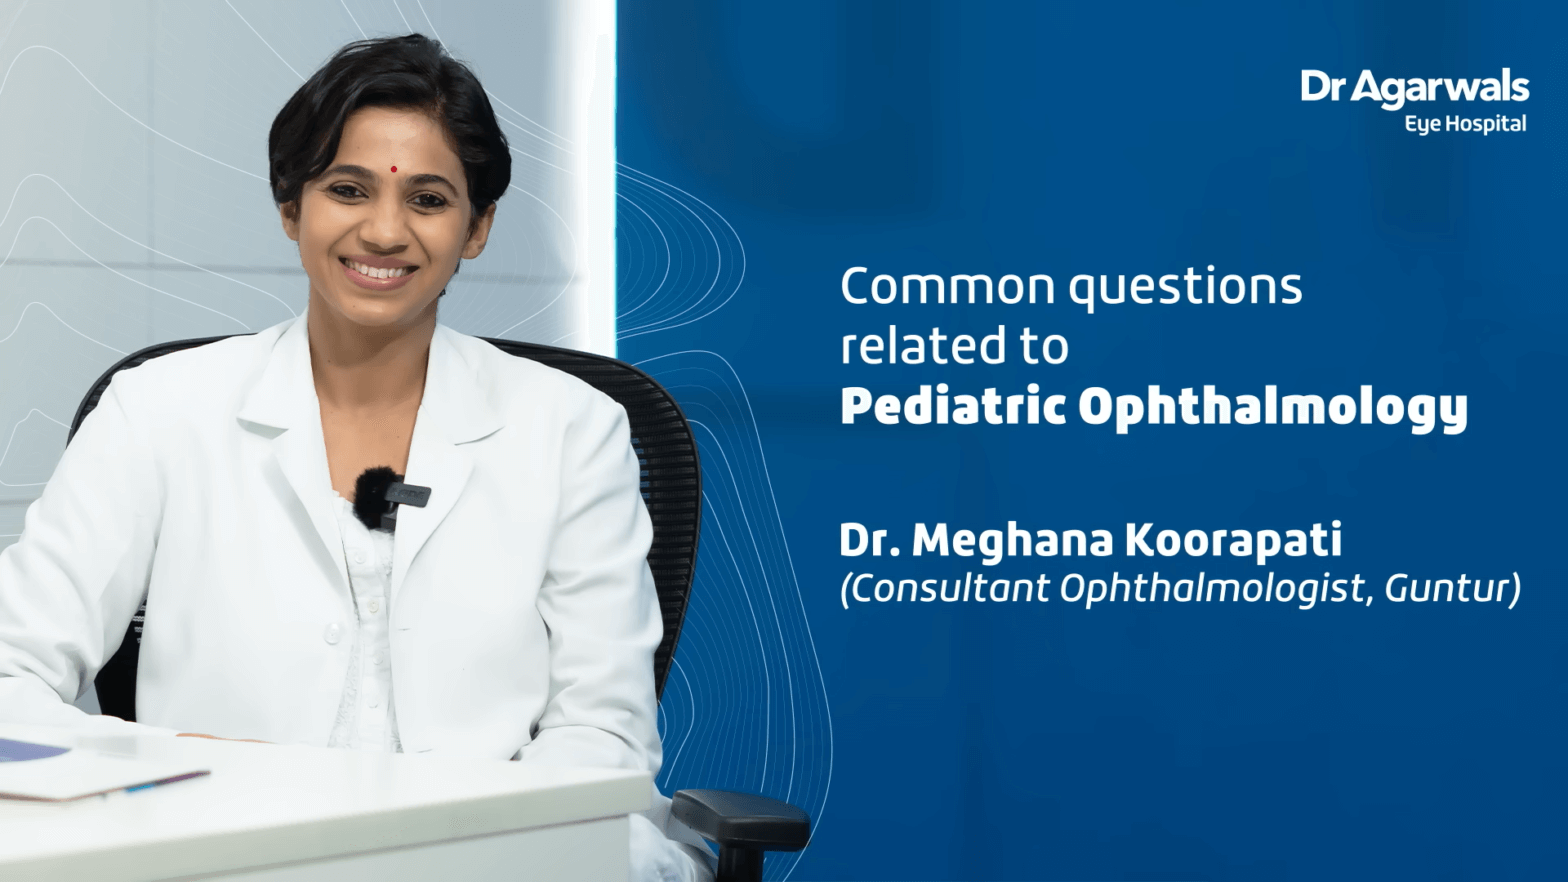 Common Queries on Paediatric Ophthalmology